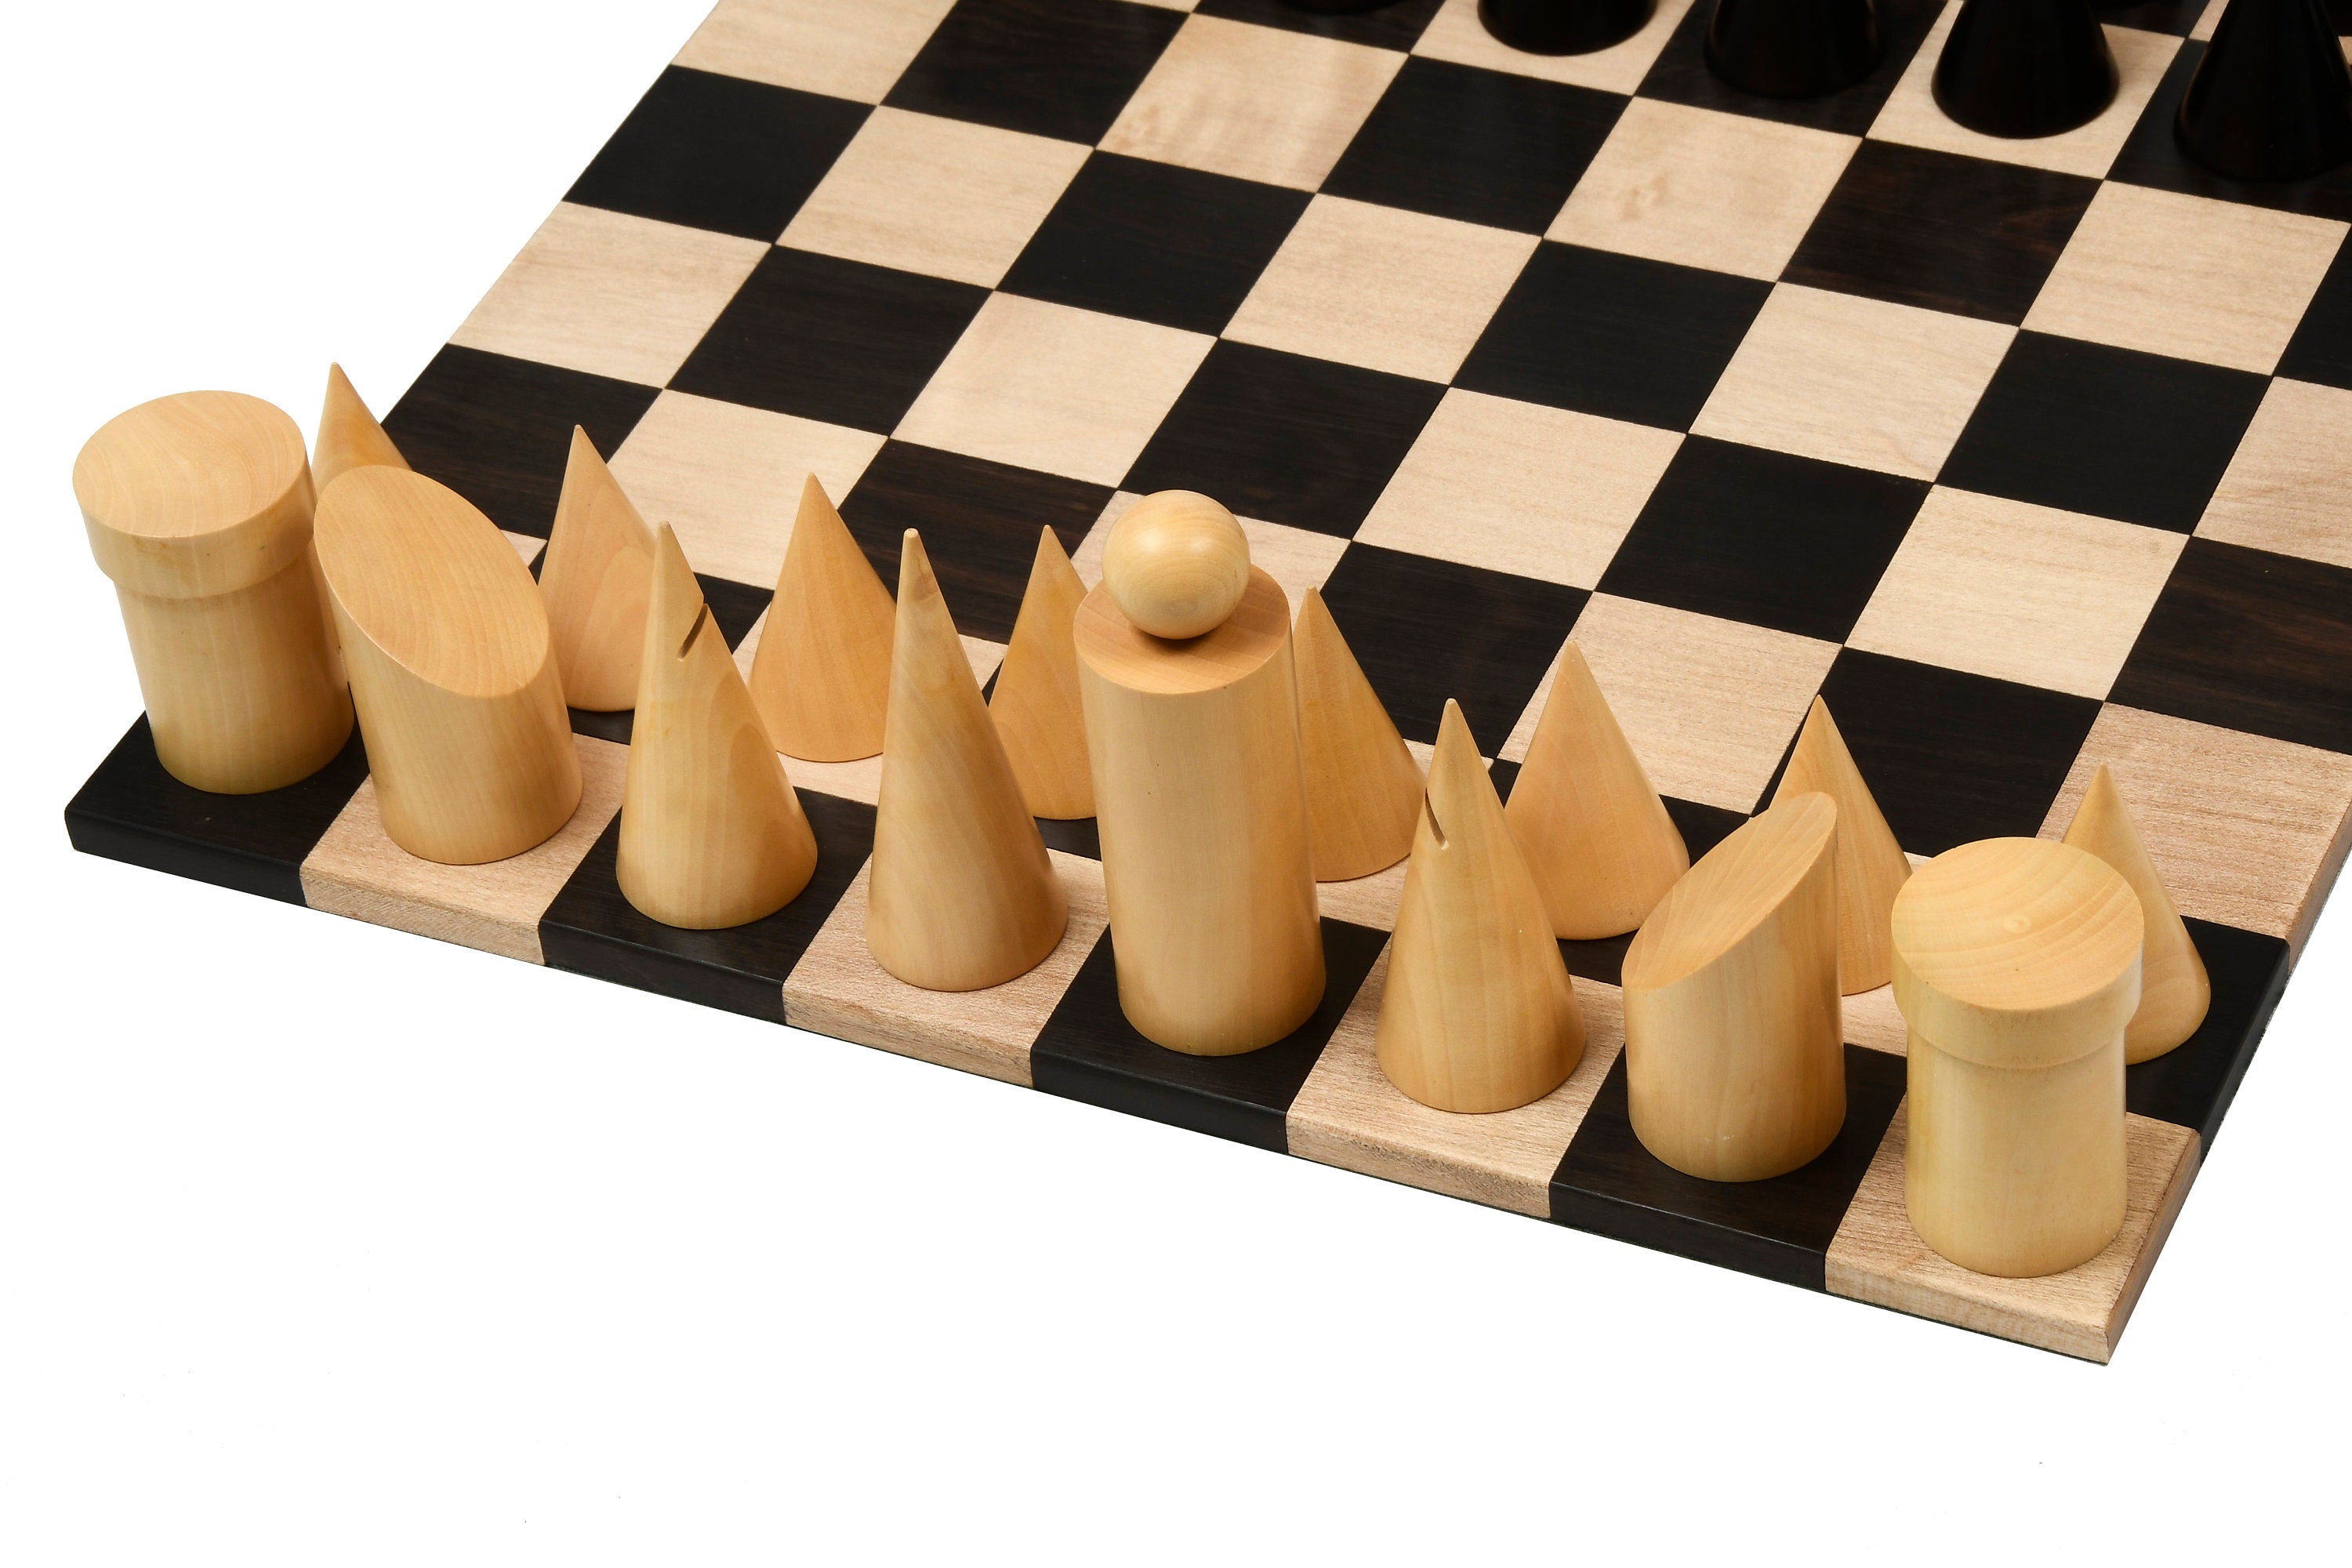 2 chess sets with a minimalistic and alluring twist - DesignWanted :  DesignWanted